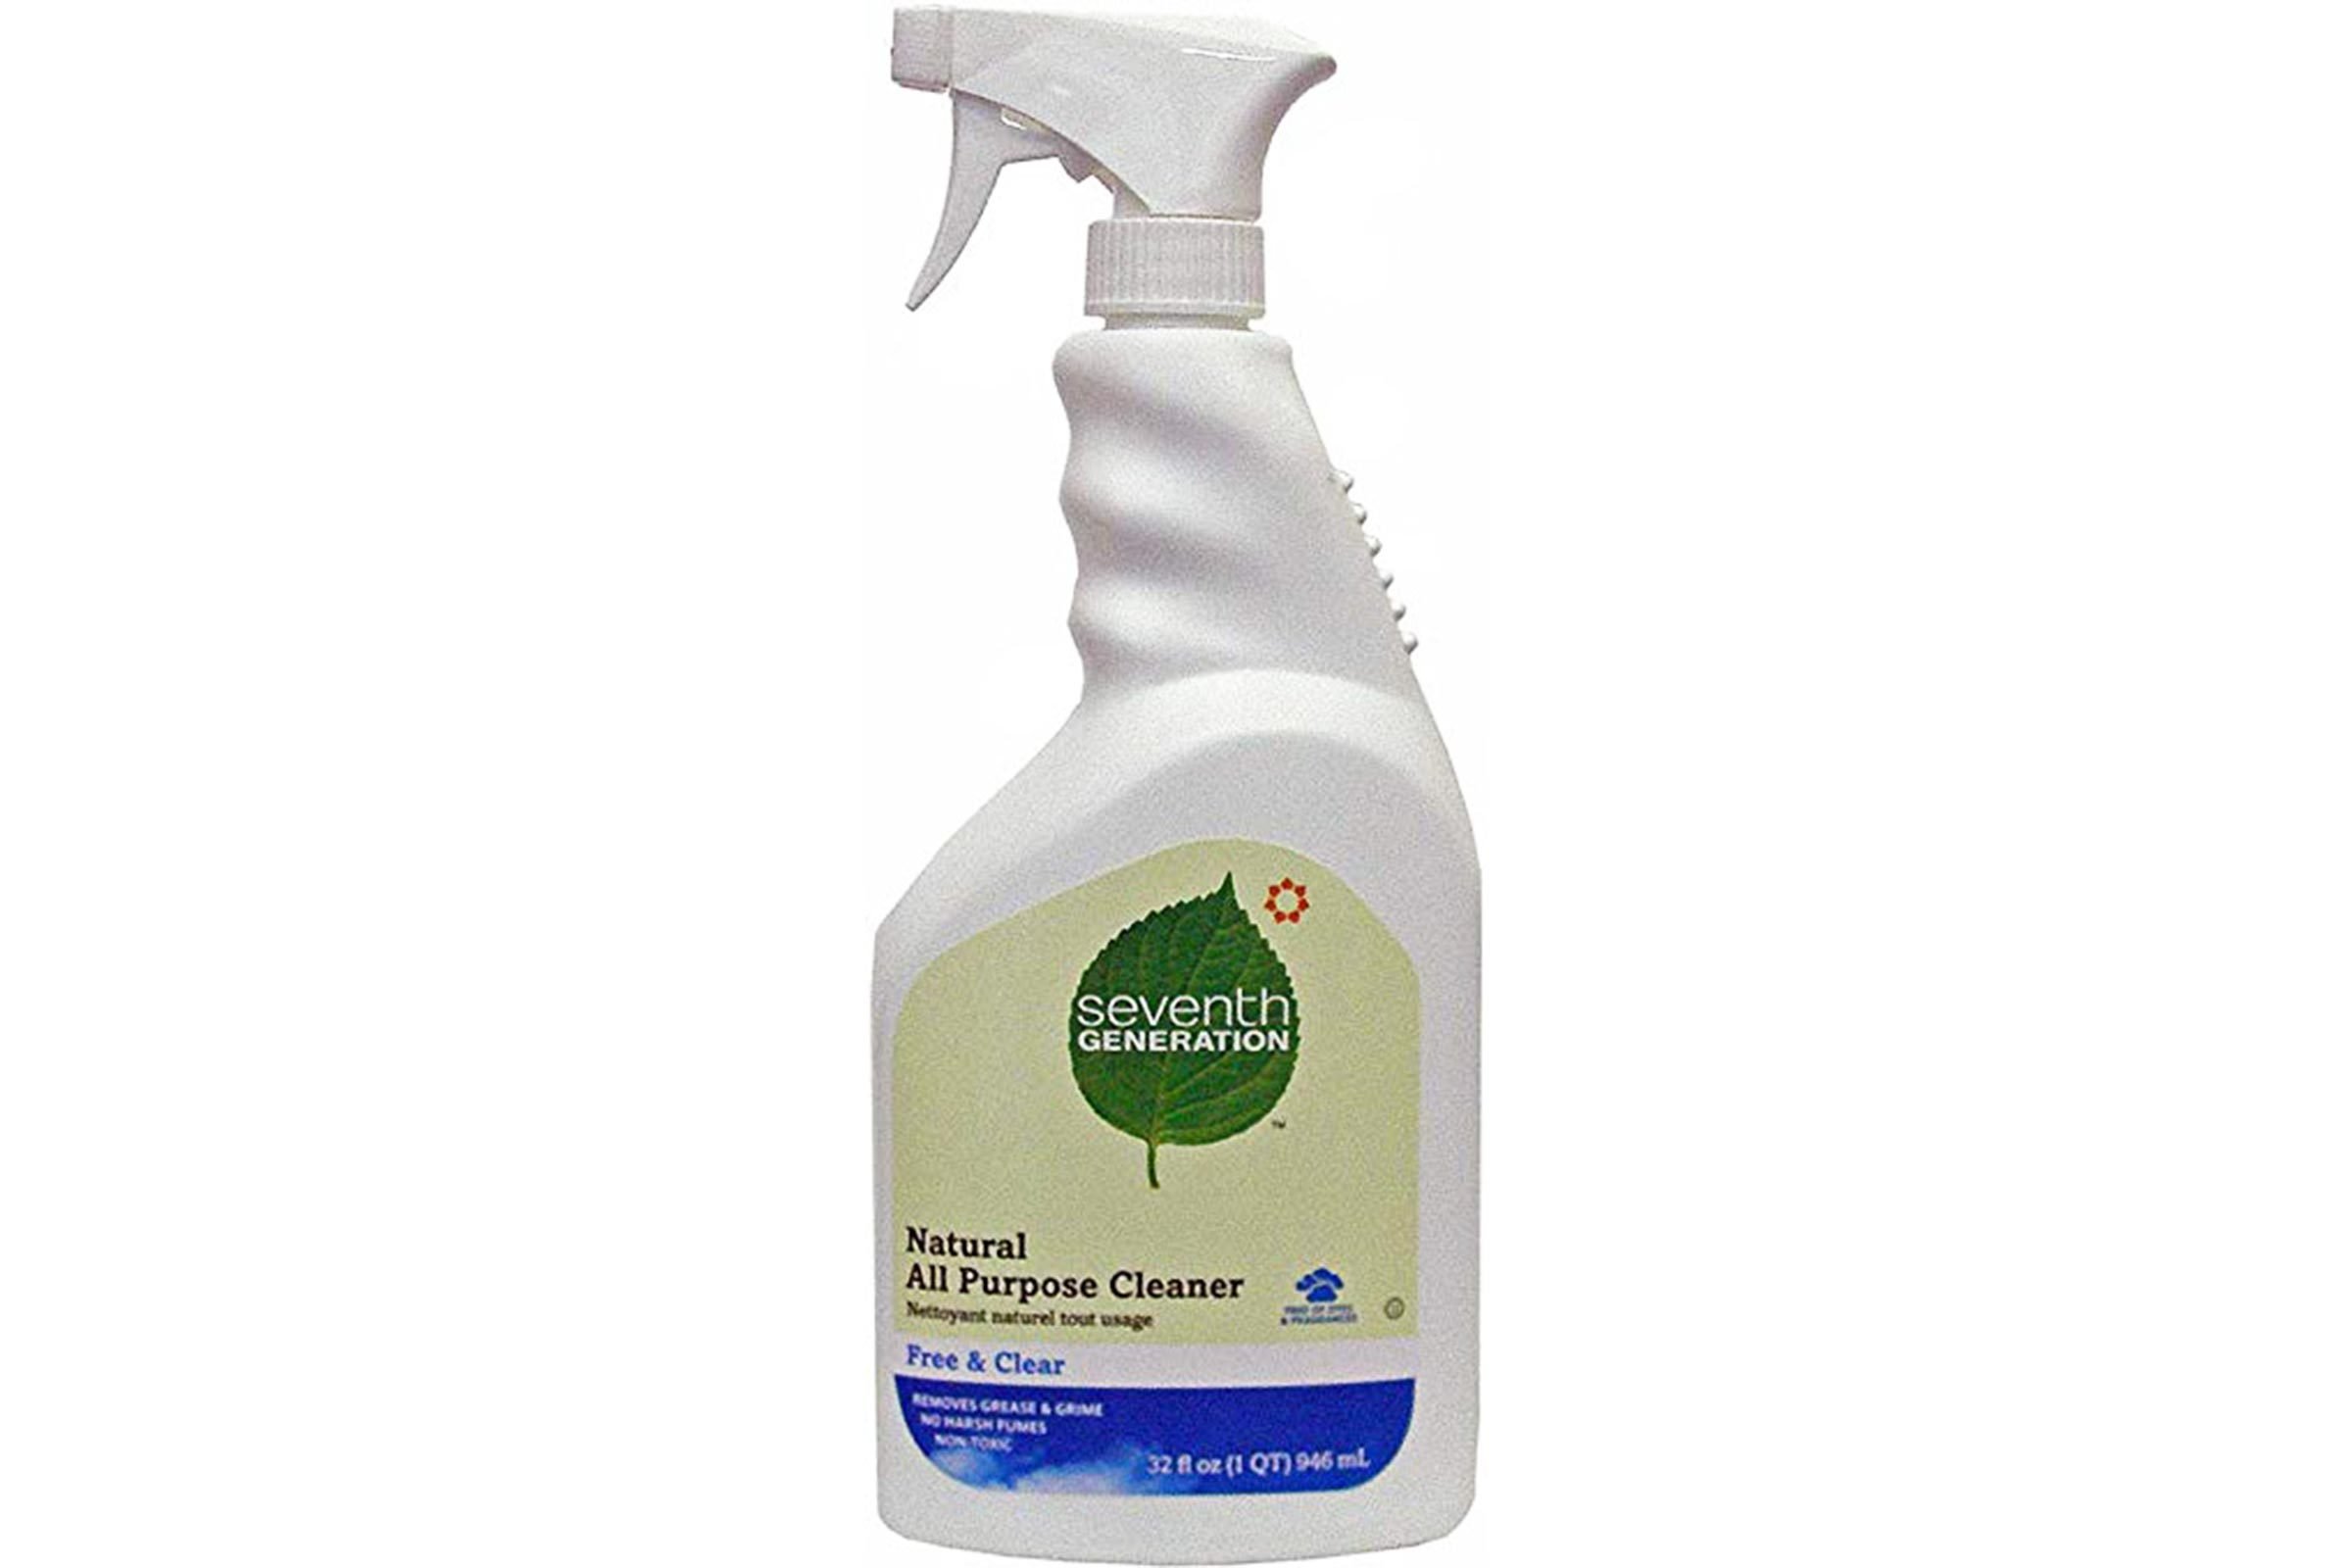 Top 13 Reviewed Organic Cleaning Products